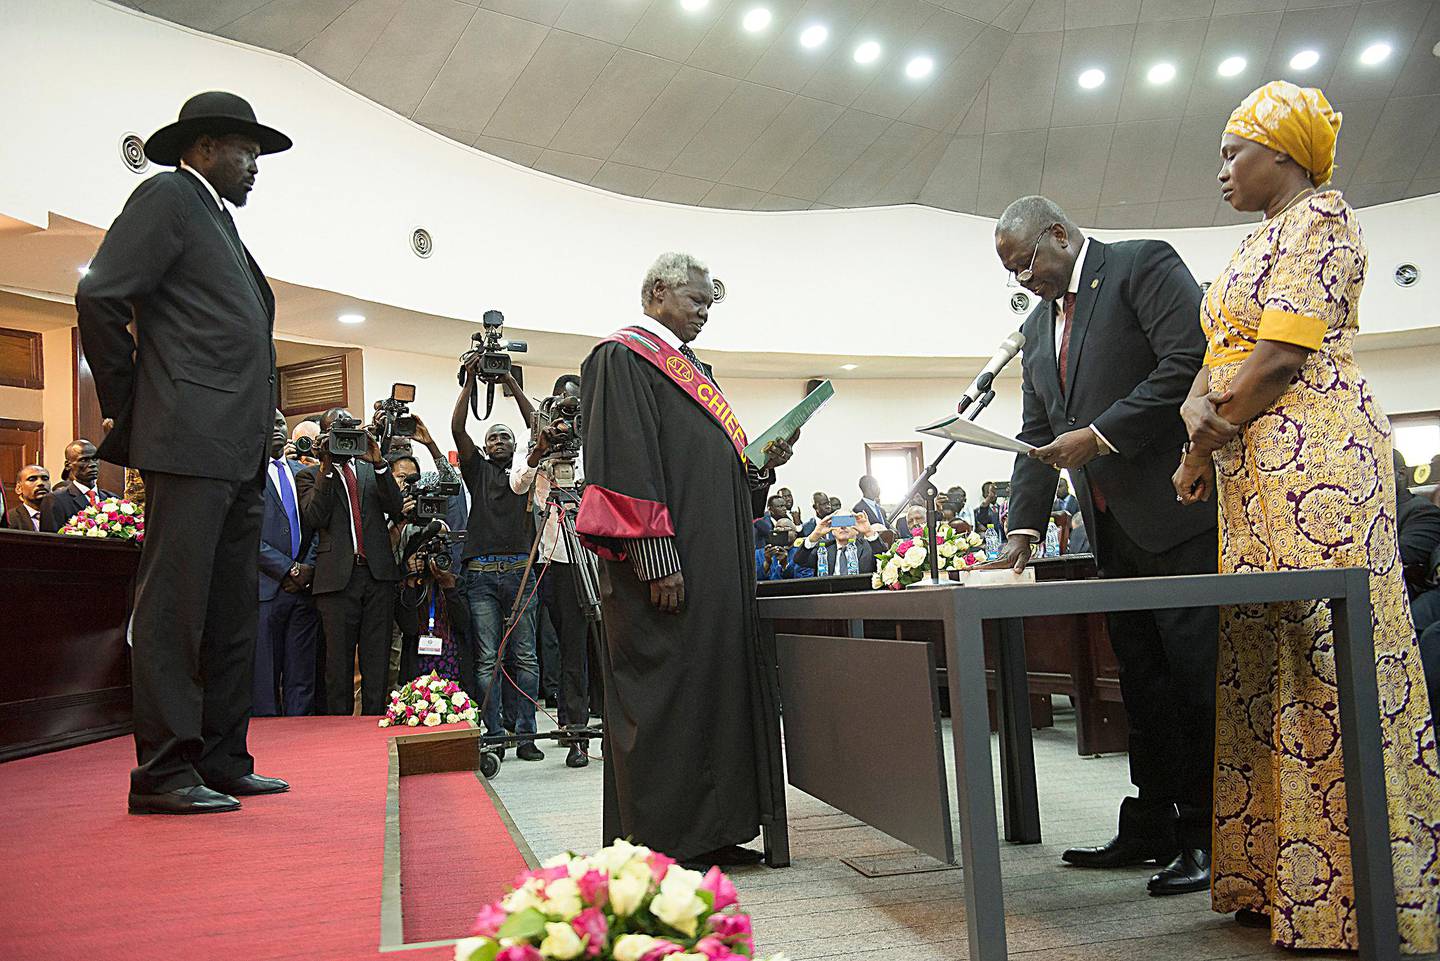 The president of South Sudan, Salva Kiir Mayardit, left, swears in Dr. Riek Machar as the first Vice President of South Sudan, in Juba, South Sudan Saturday, Feb. 22, 2020. South Sudan opened a new chapter in its fragile emergence from civil war Saturday as rival leaders formed a coalition government. (AP Photo/Charles Atiki Lomodong )